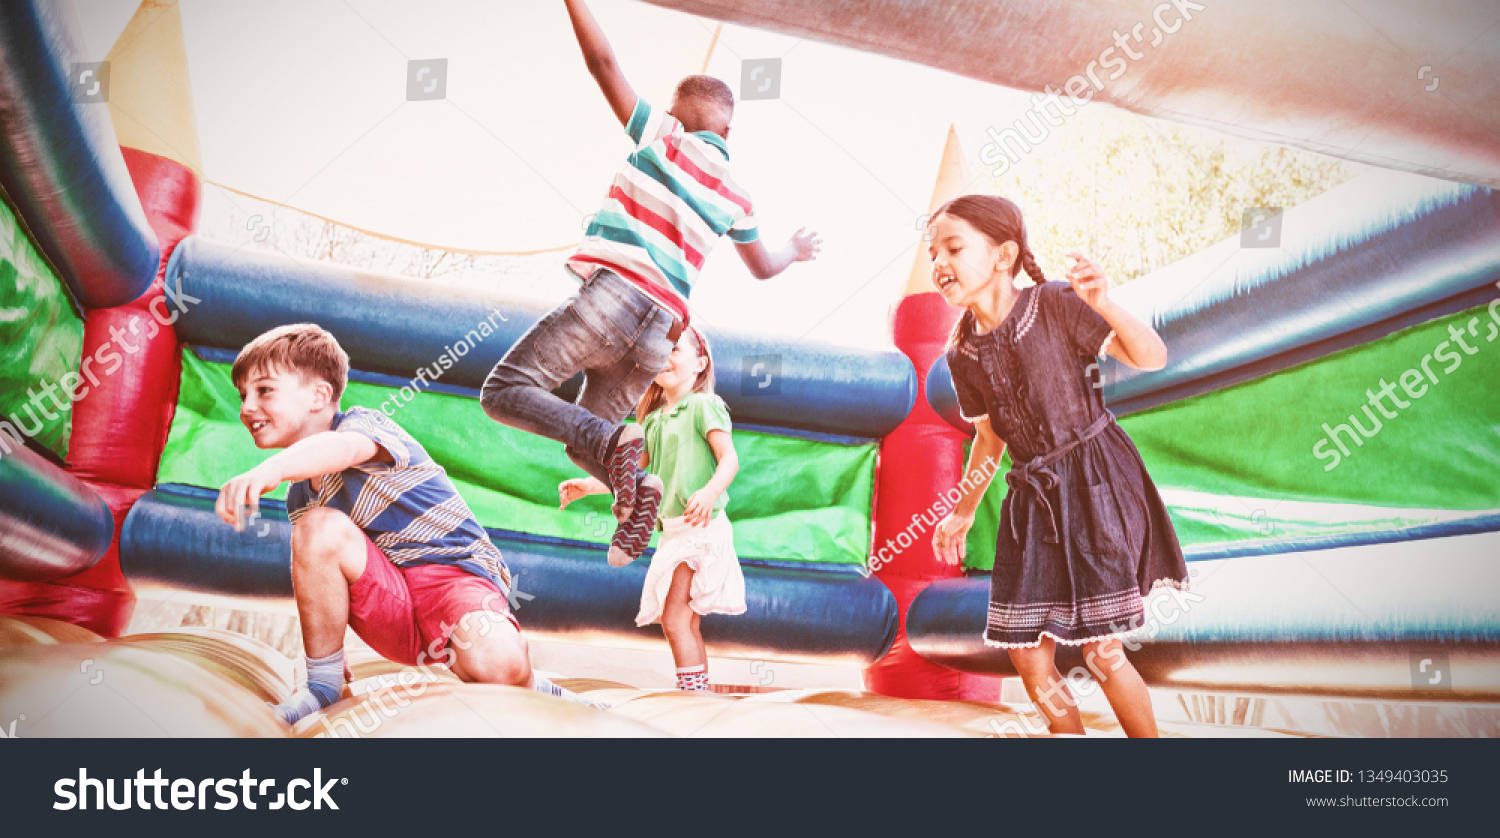 Friends jumping on bouncy castle at playground #1349403035